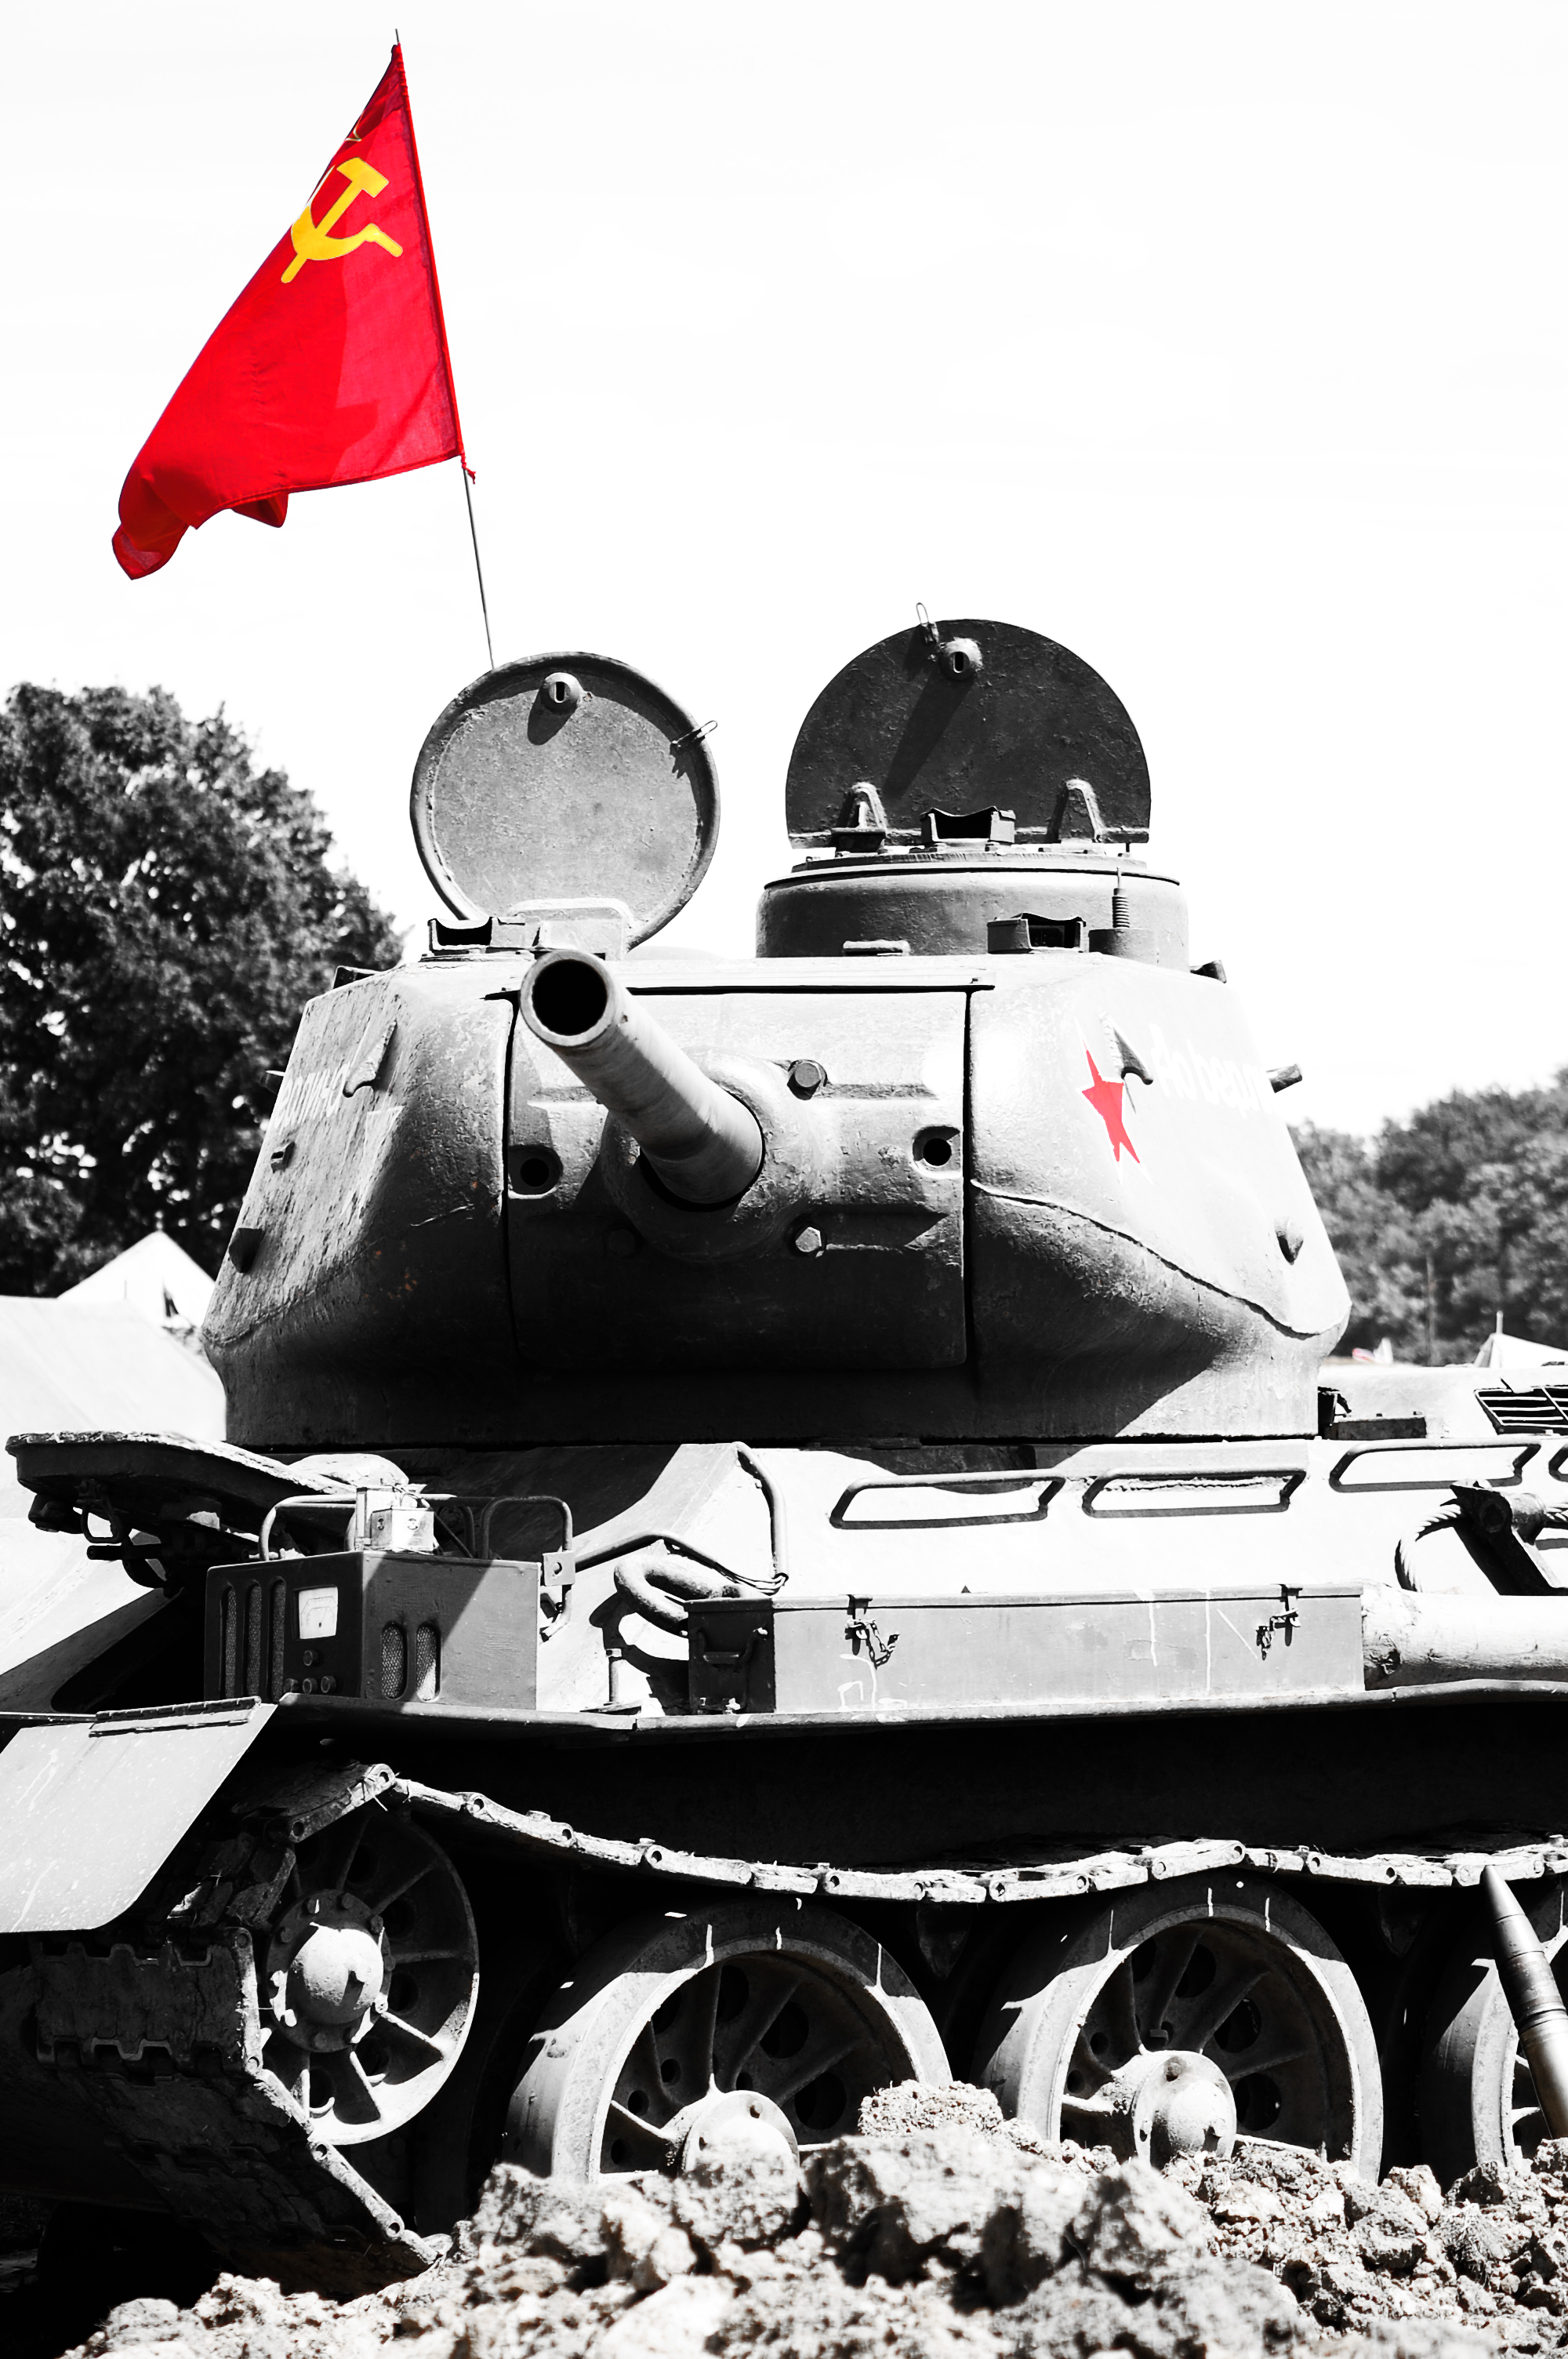 File:T-34-85 tank with the flag of the Soviet Union.jpg - Wikimedia Commons